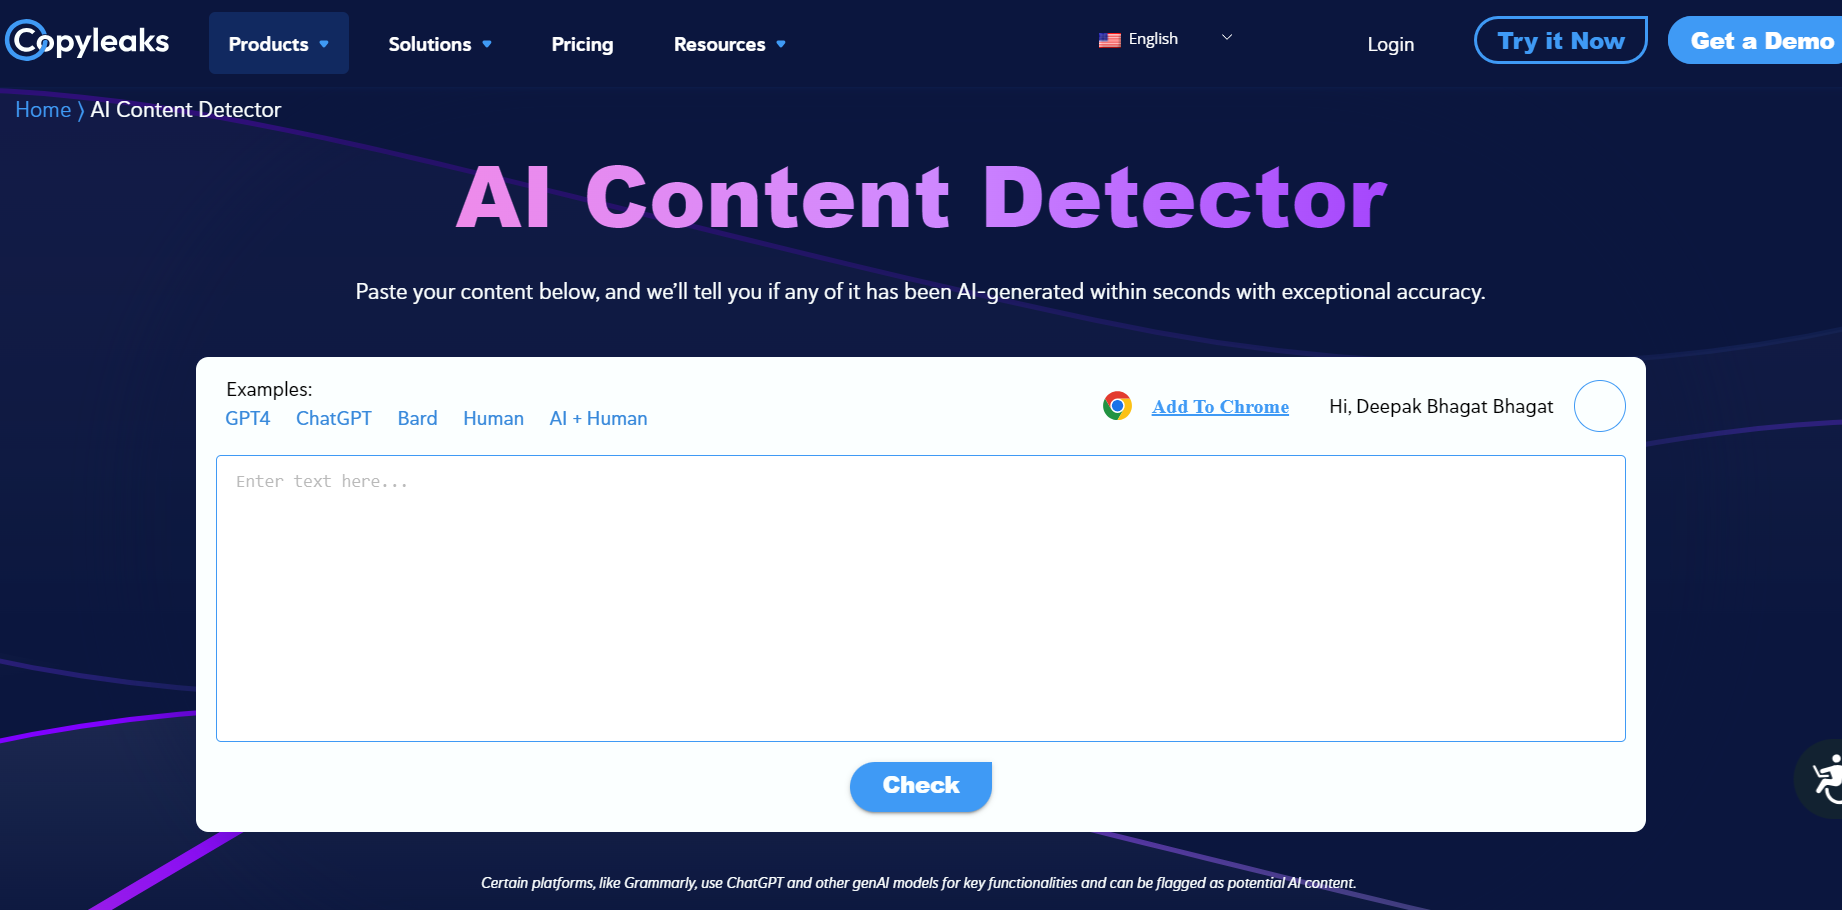 7 Powerful Benefits of Using Copyleaks AI Content Detector for Your Writing